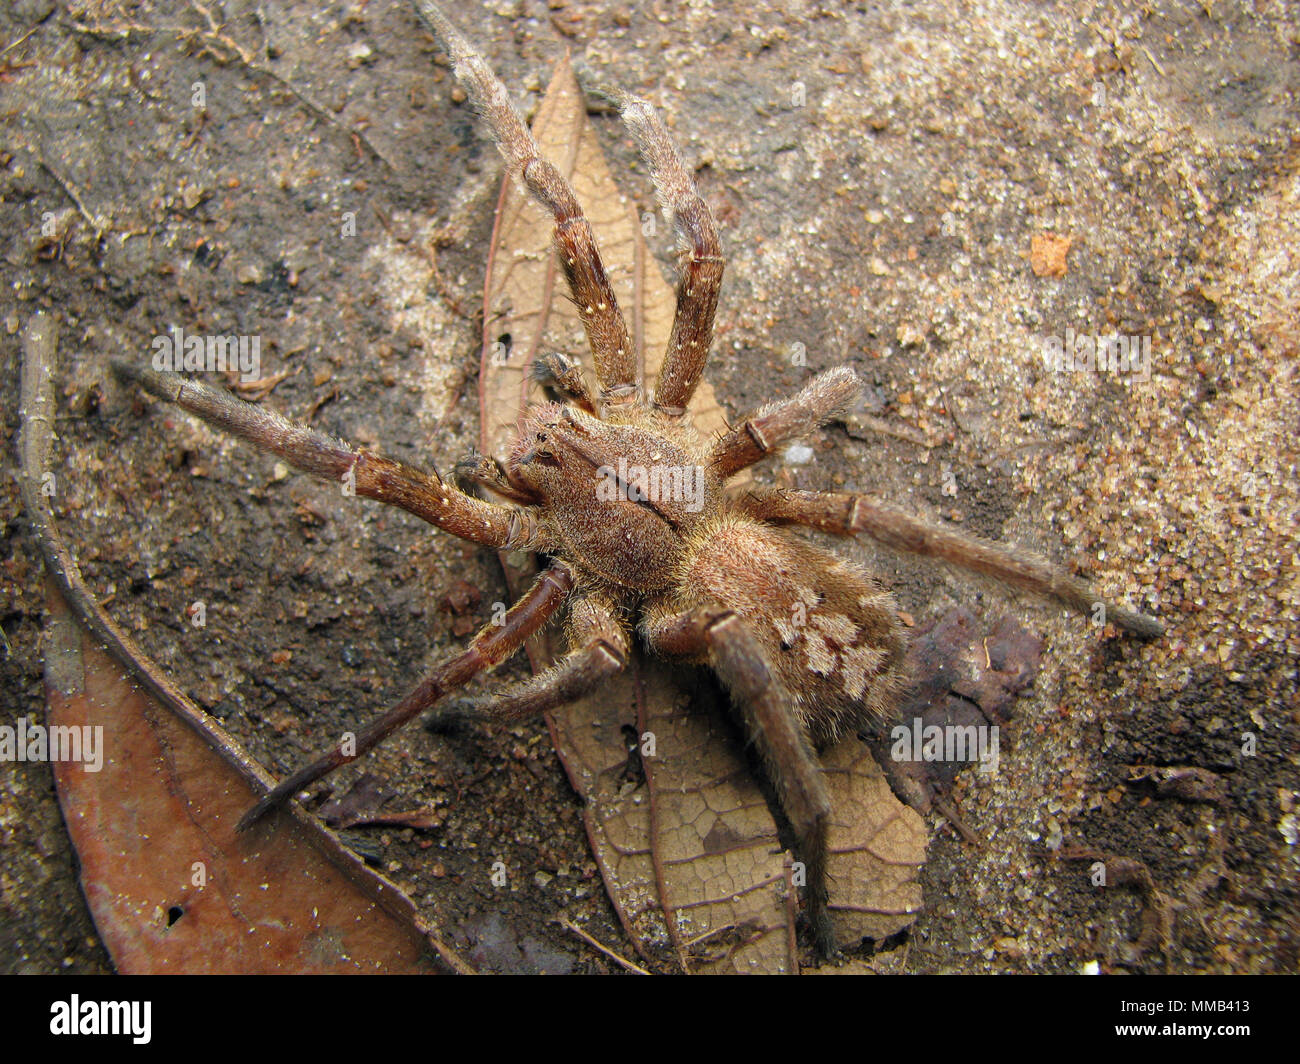 Dorsal view of a brazilian wandering spider (Phoneutria), also known as armadeira or banana spider. Stock Photo